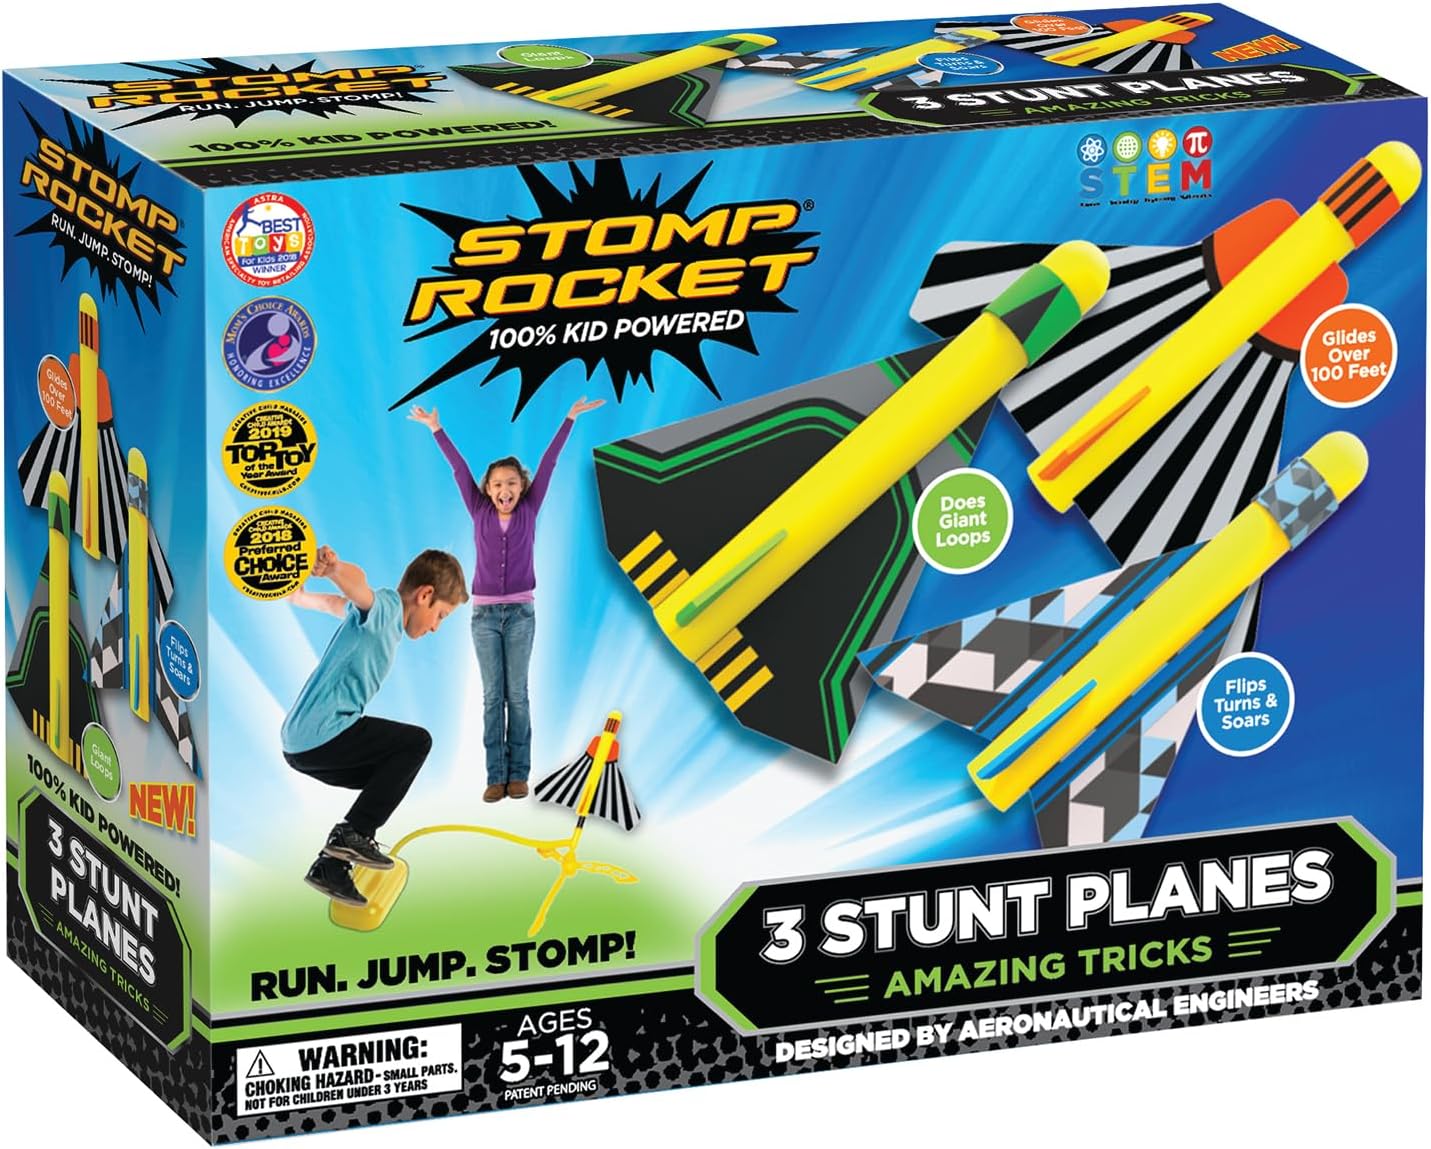 Stomp Rocket® Original Stunt Plane Launcher for Kids, Soars 100 Ft, 3 Foam Stunt Planes and Adjustable Launcher, Gift for Boys and Girls Ages 5 and up - image 1 of 7